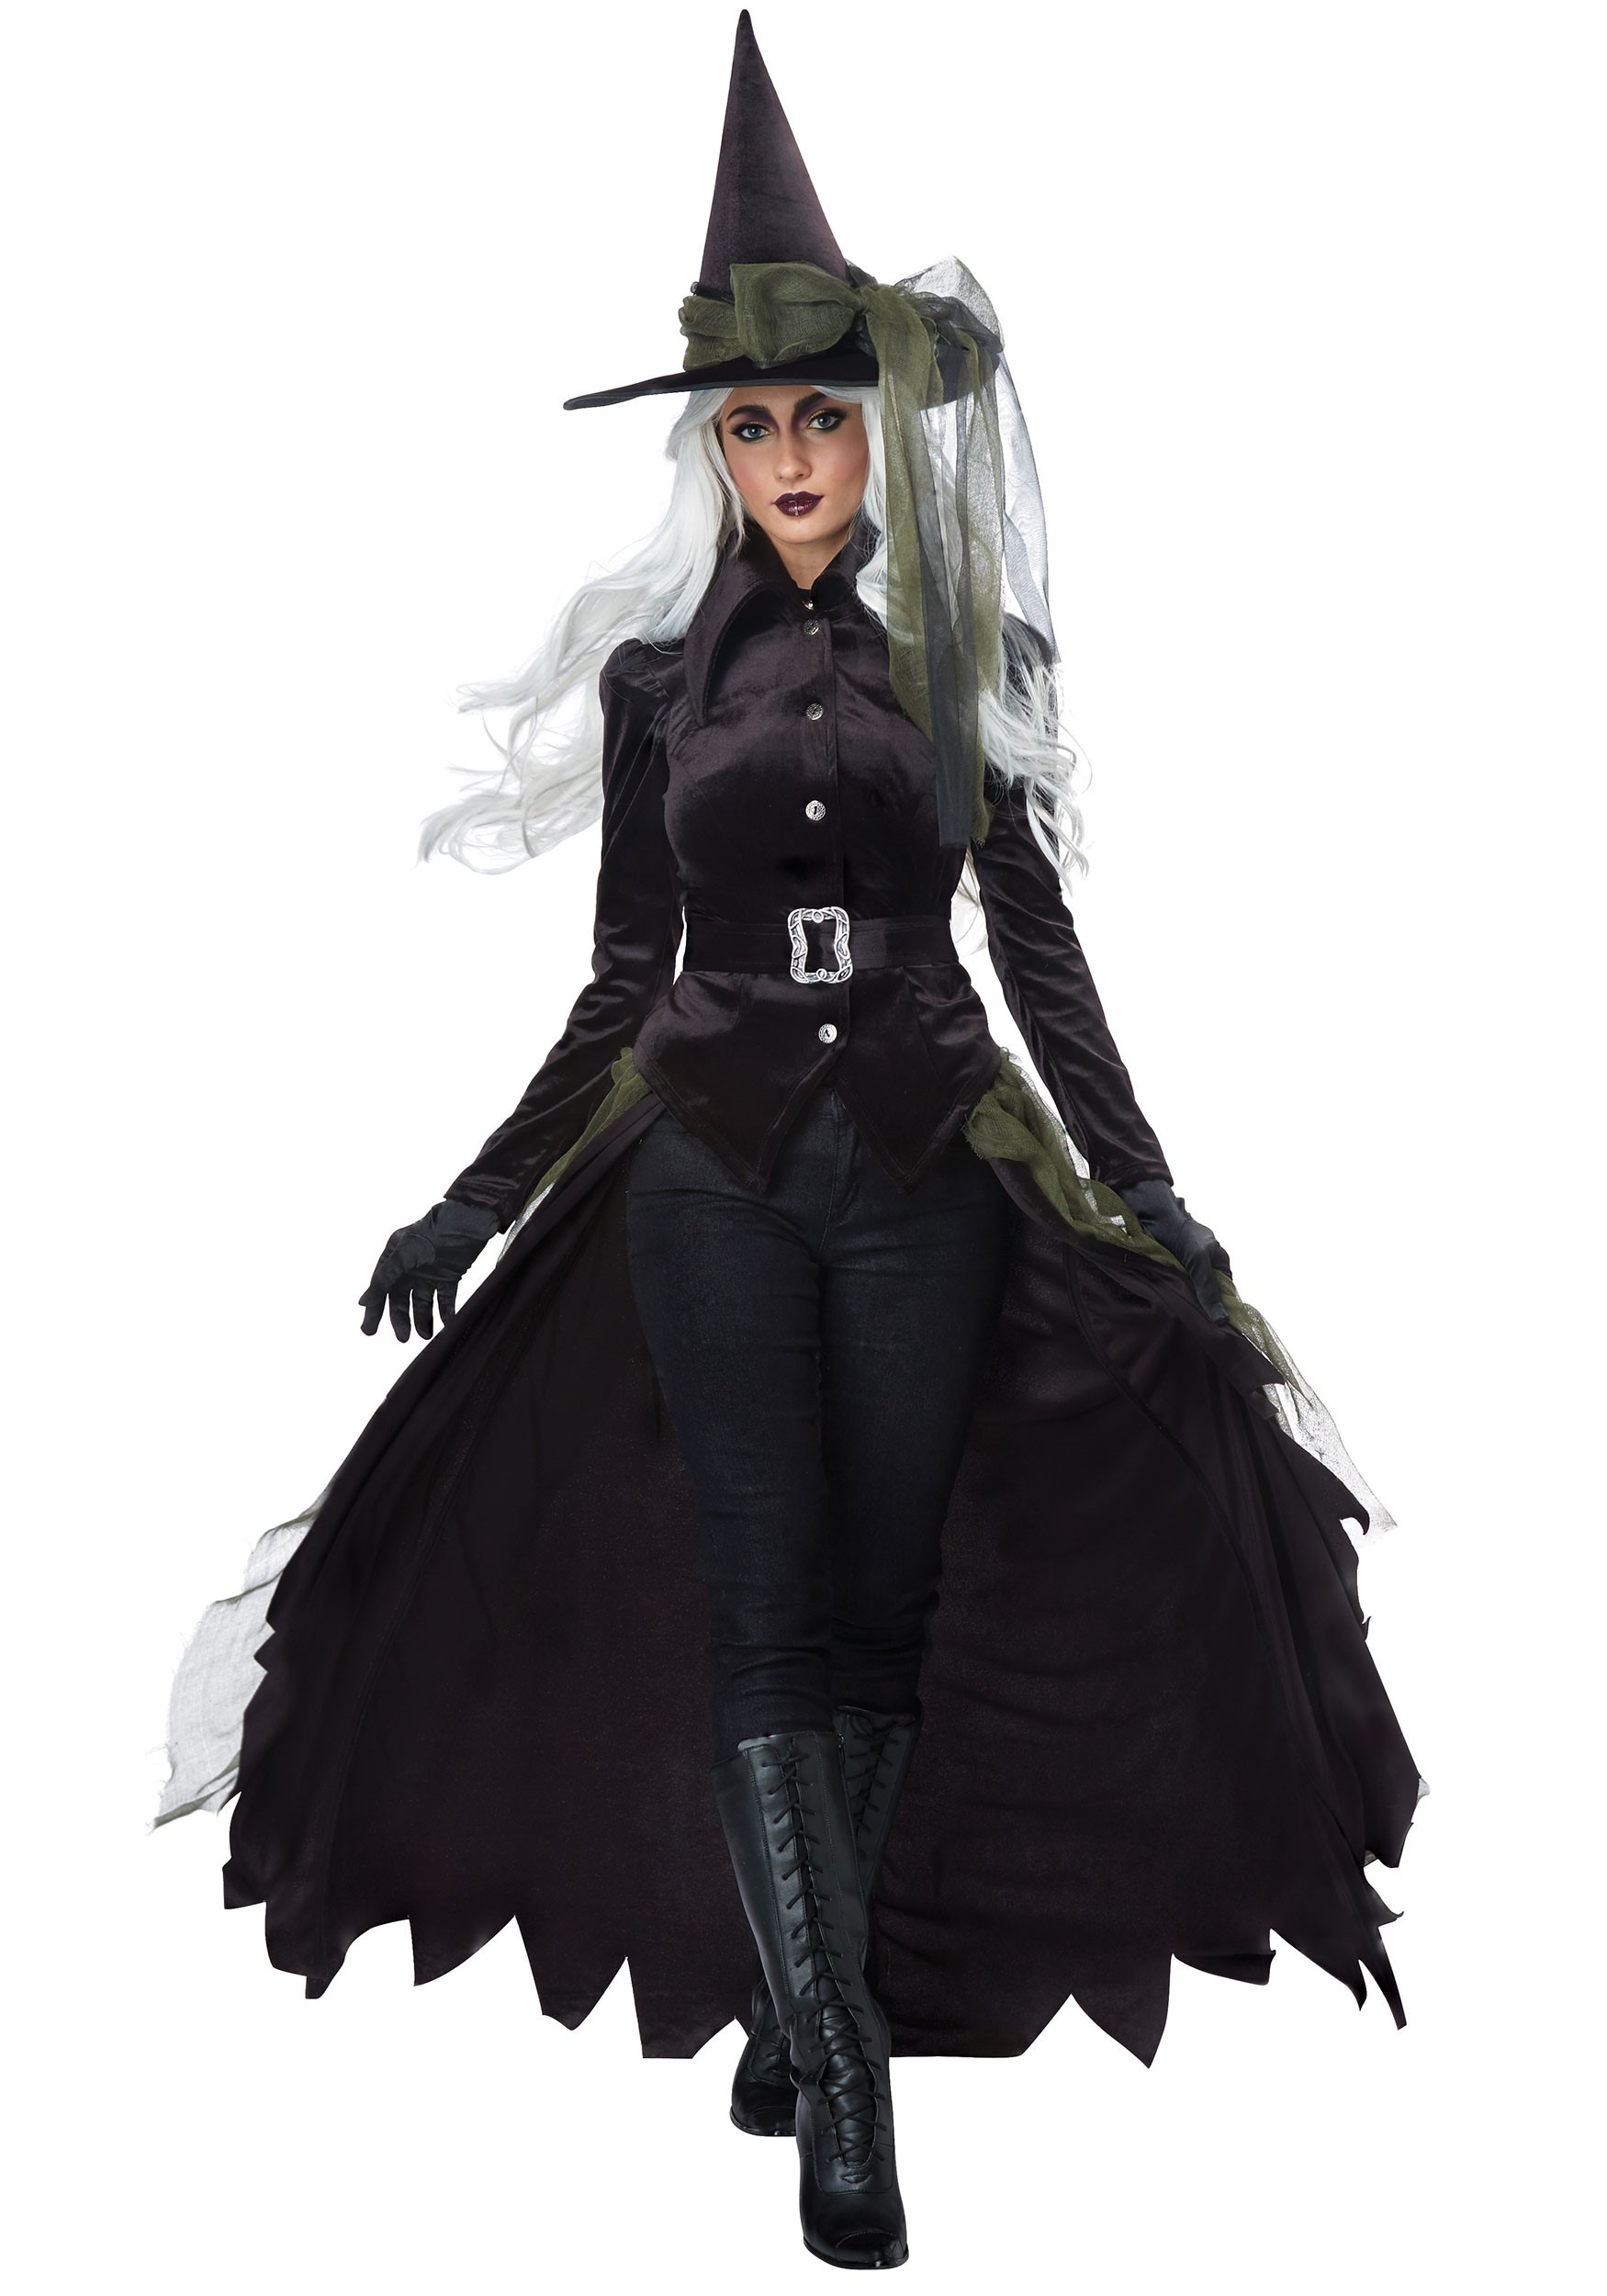 Cool Witch Costume For Women , Adult Sorceress Costume